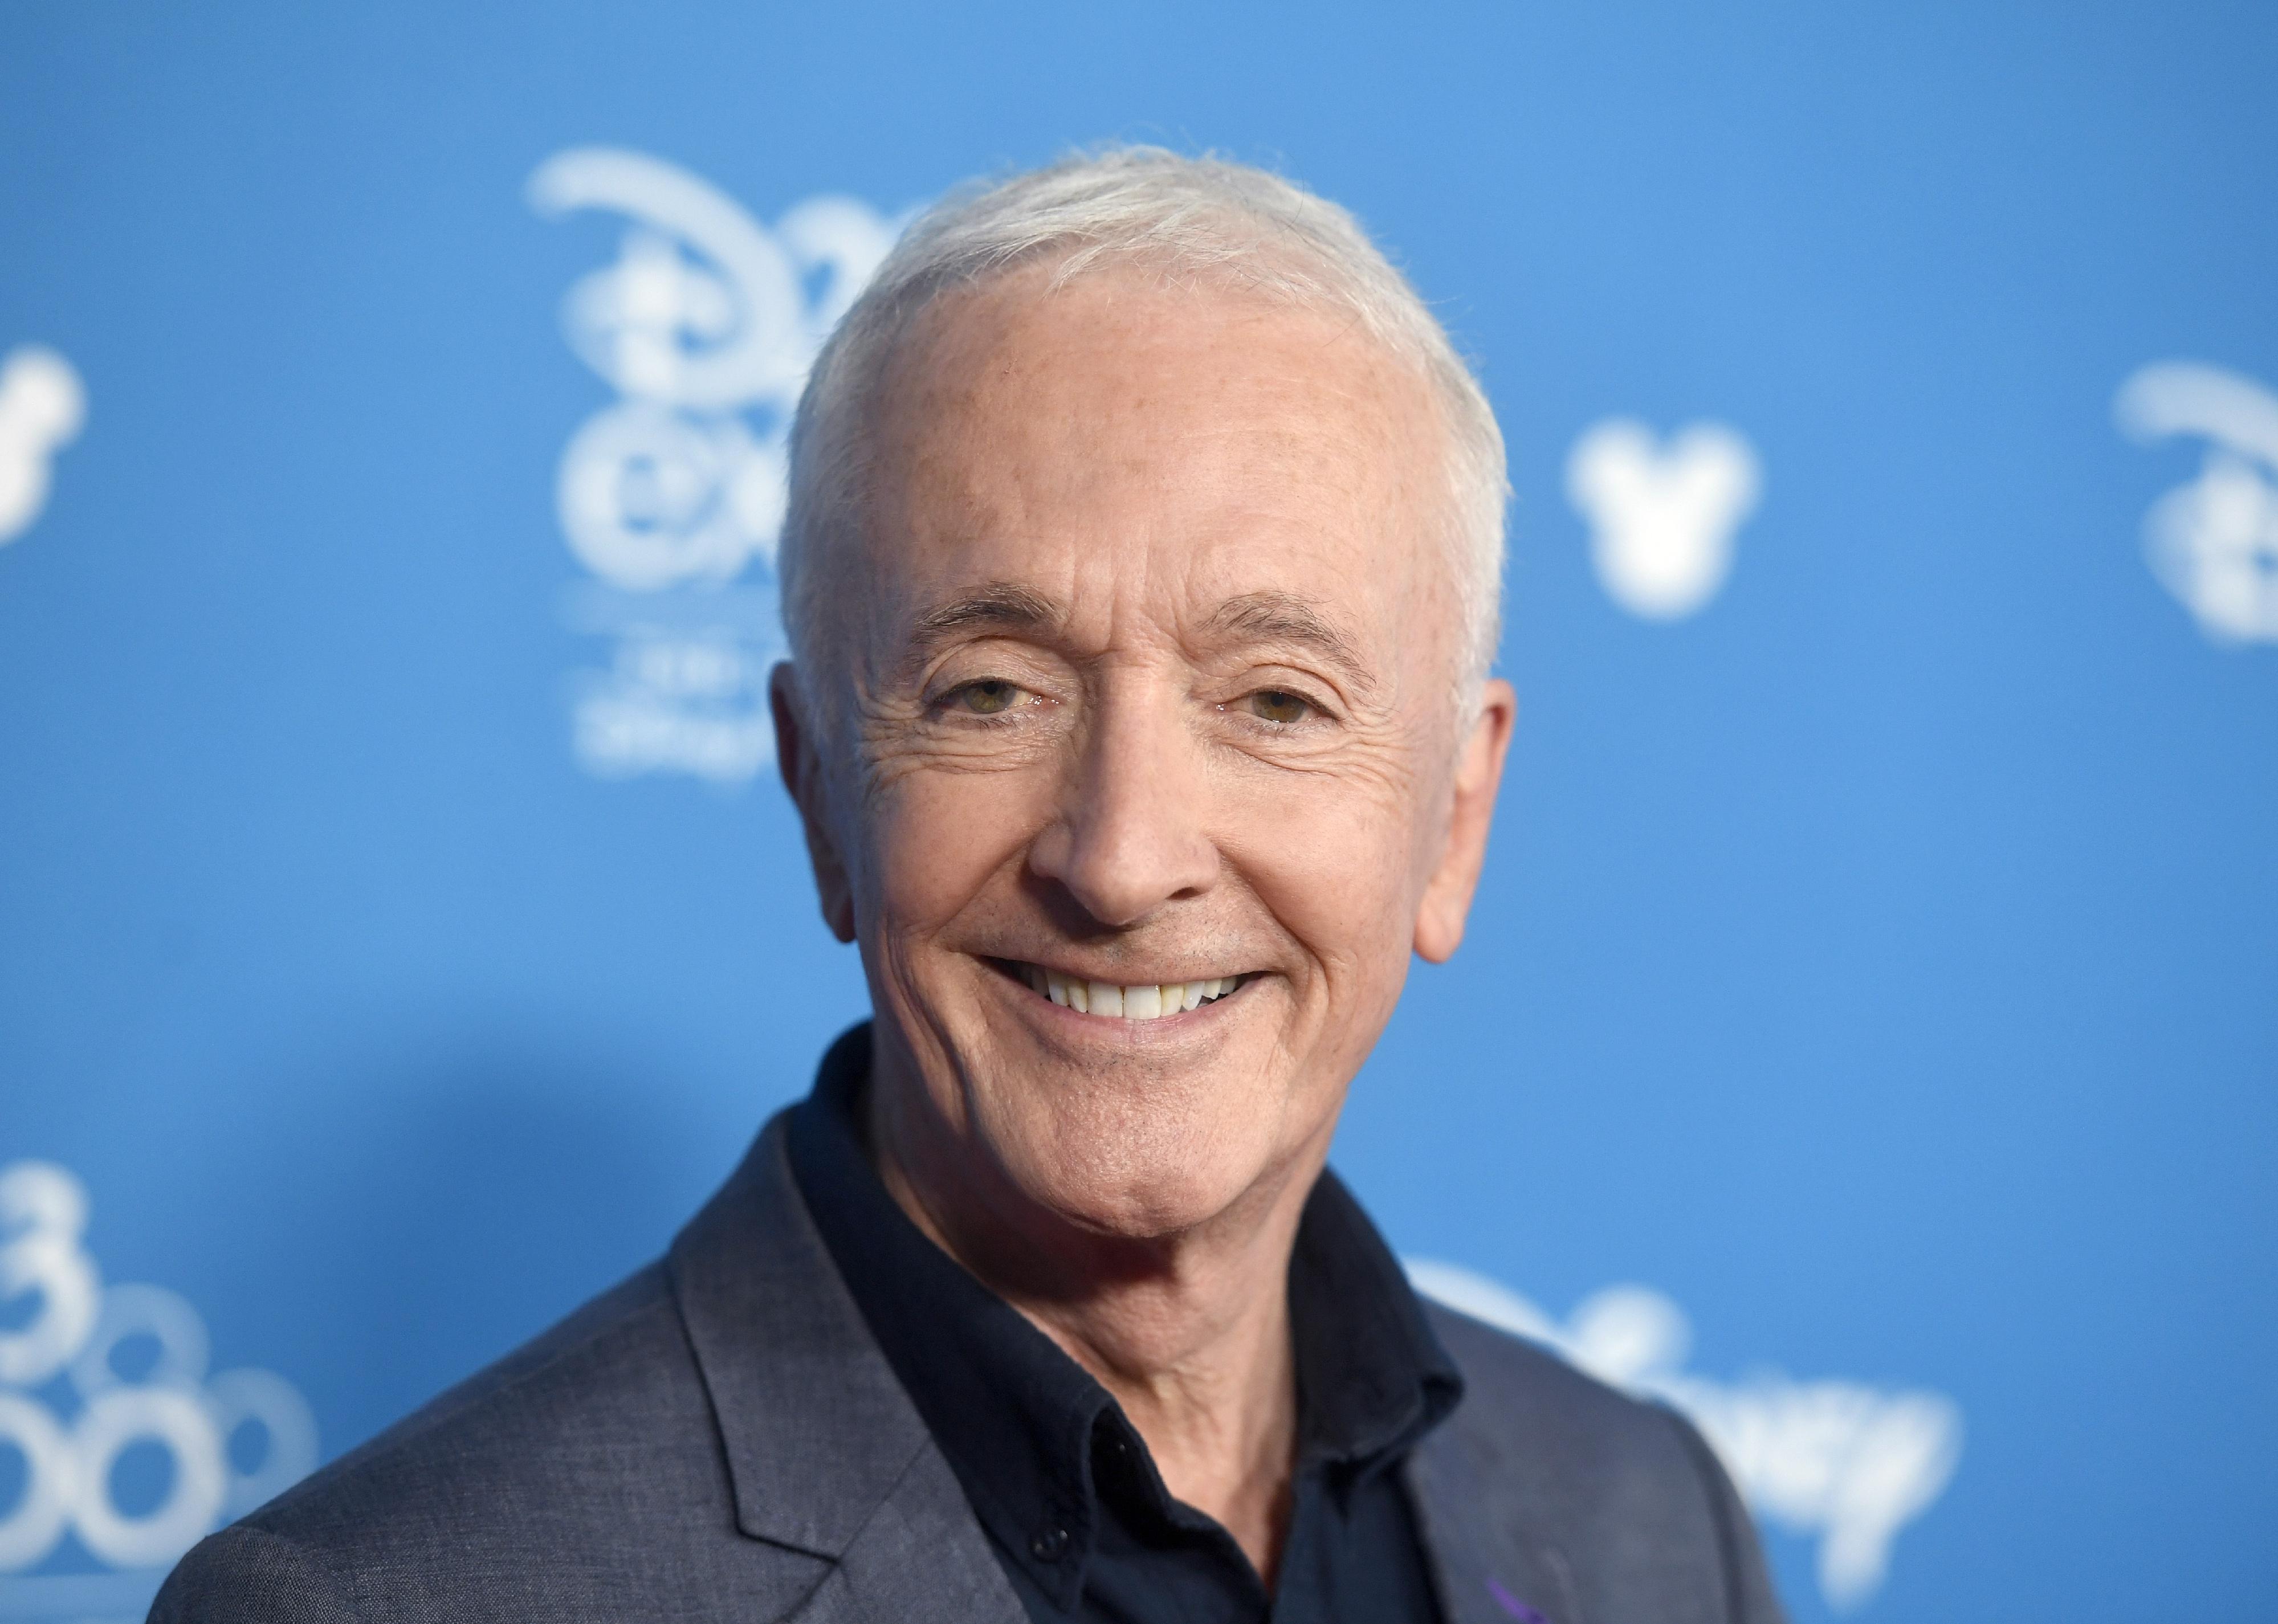 Anthony Daniels in a grey suit.